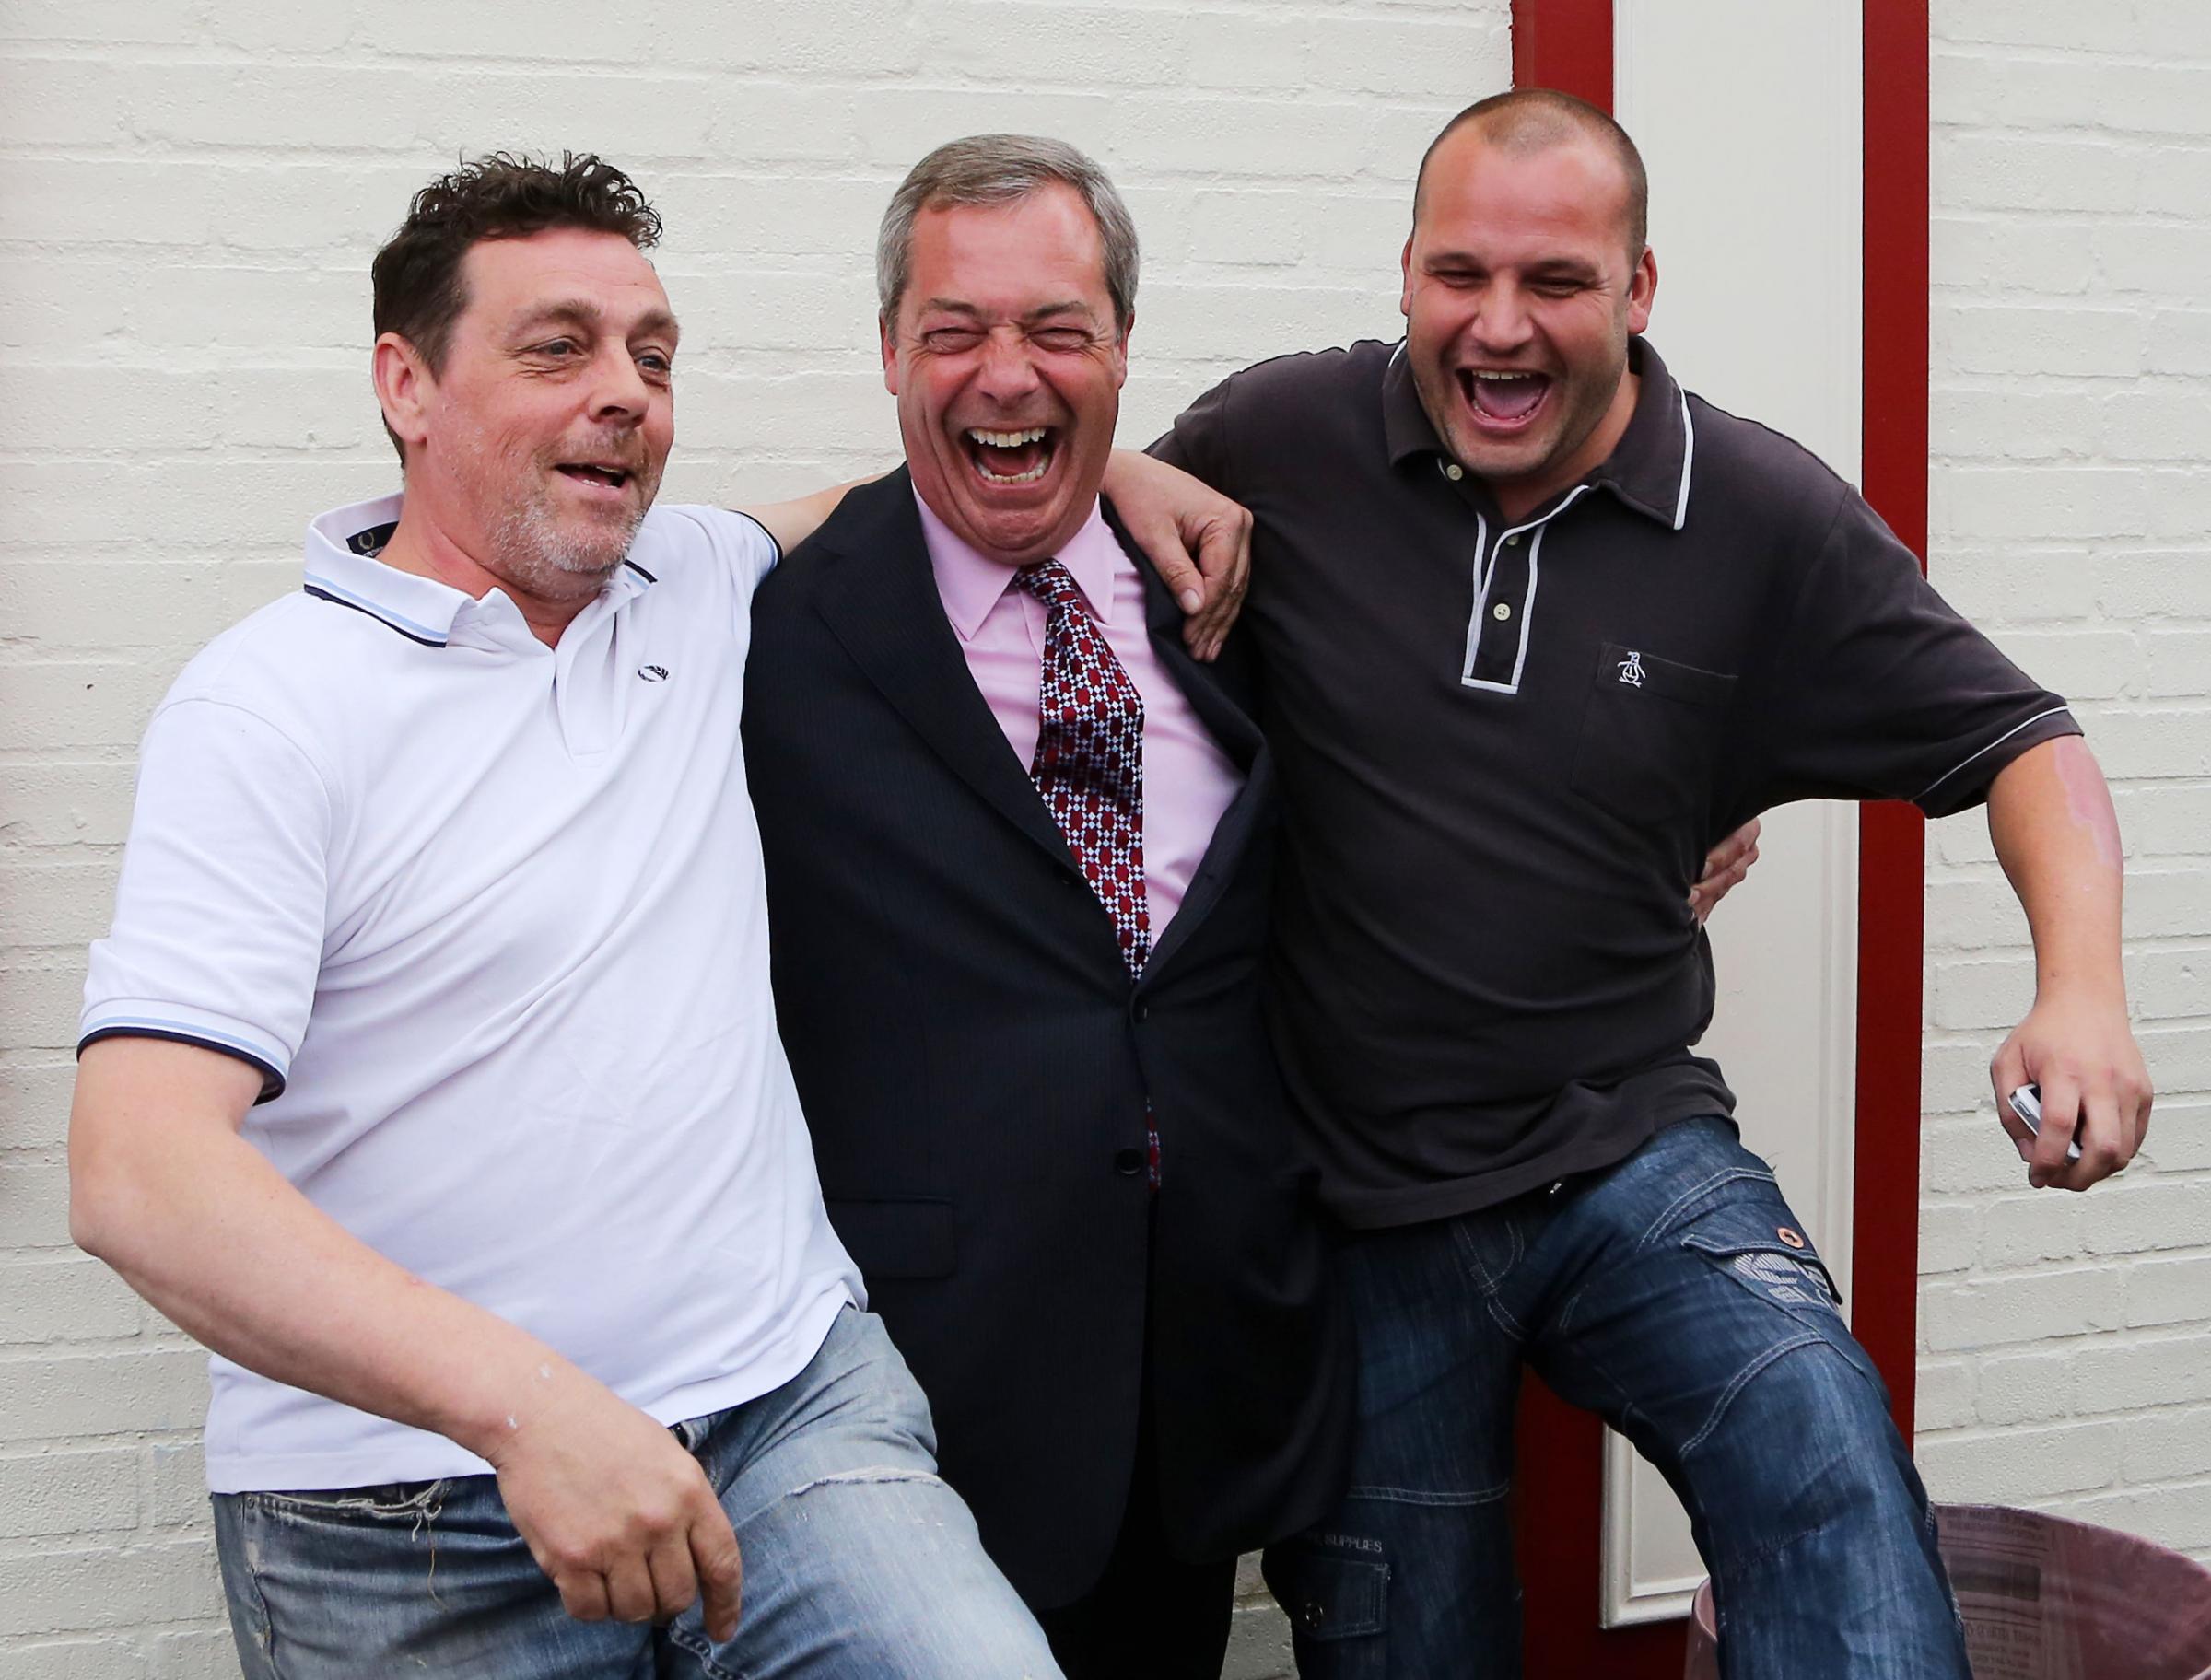 Laughter - former Ukip leader Nigel Farage celebrates with two supporters during a visit to Basildon in May 2014